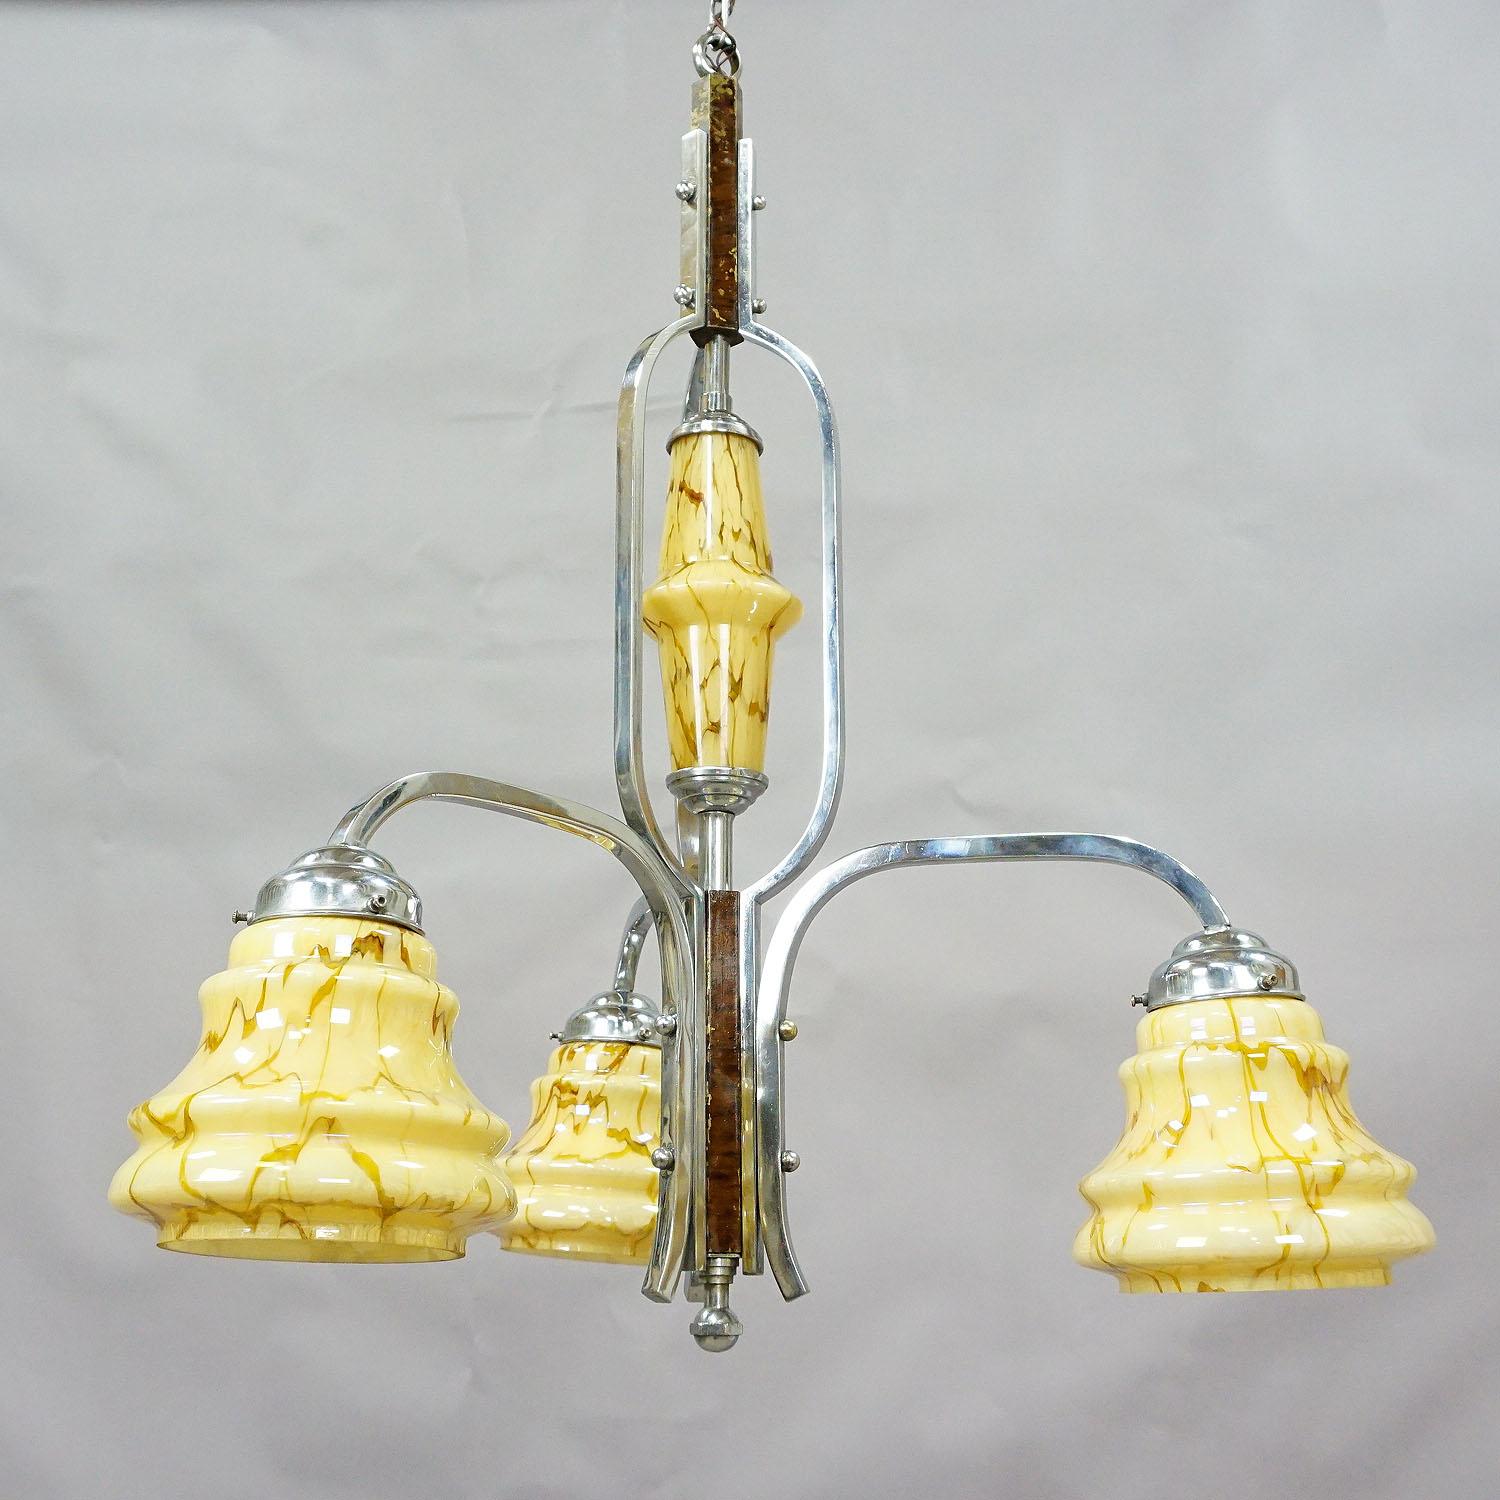 Antique Art Deco Chandelier with Three Glass Shades For Sale 1